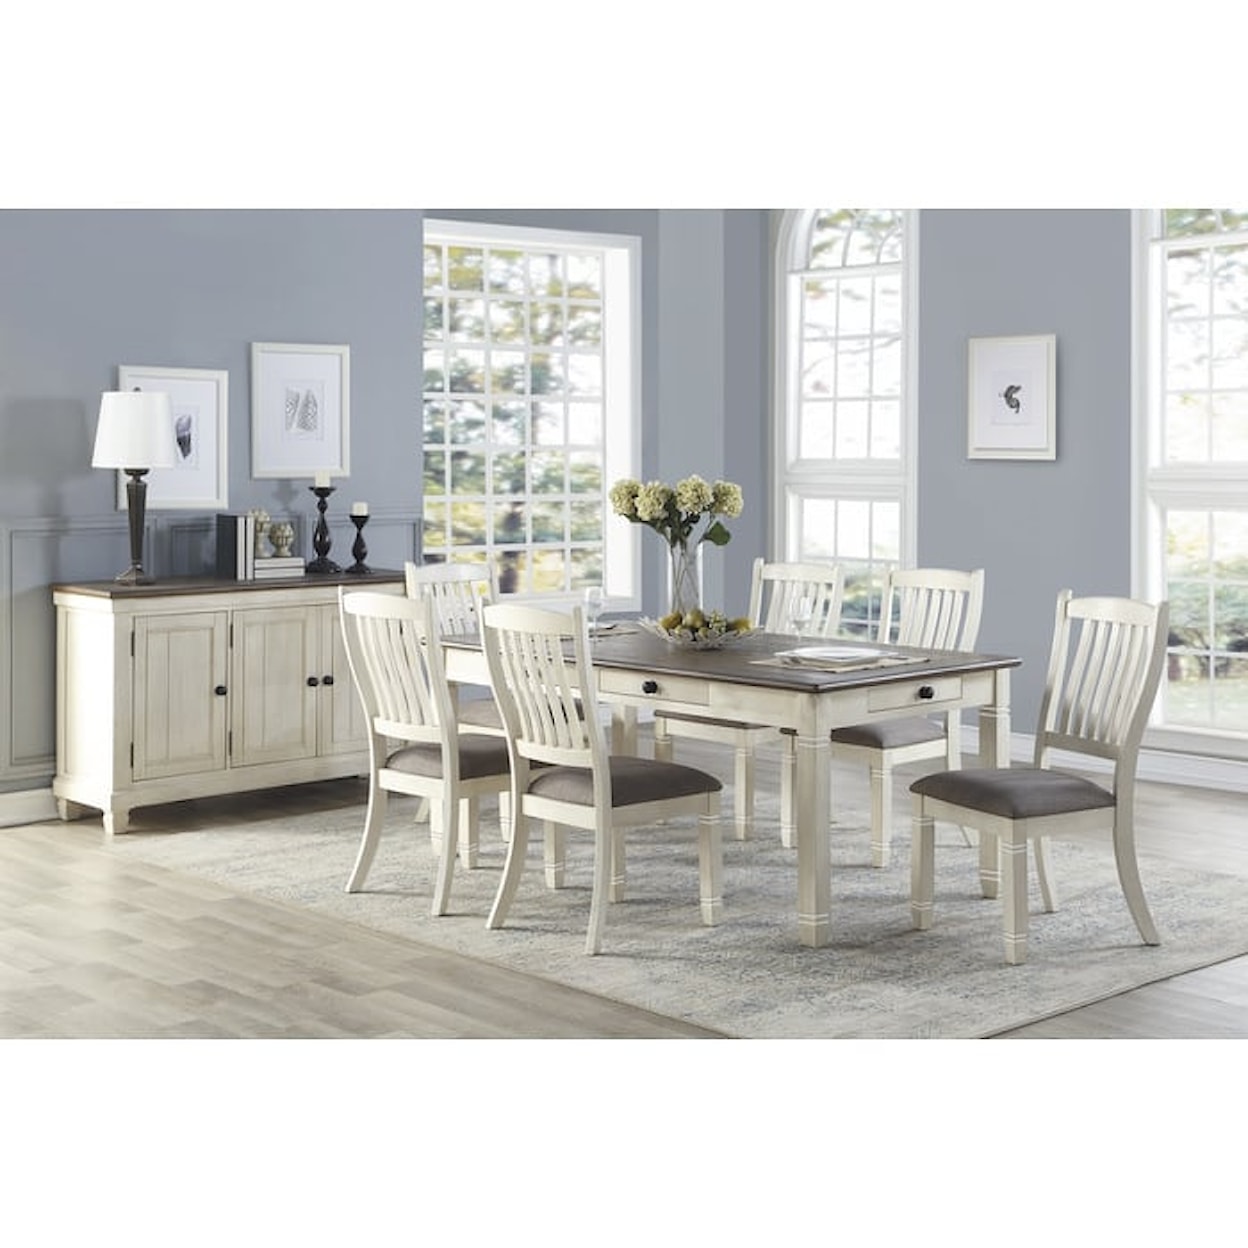 Homelegance Furniture Granby Dining Chair